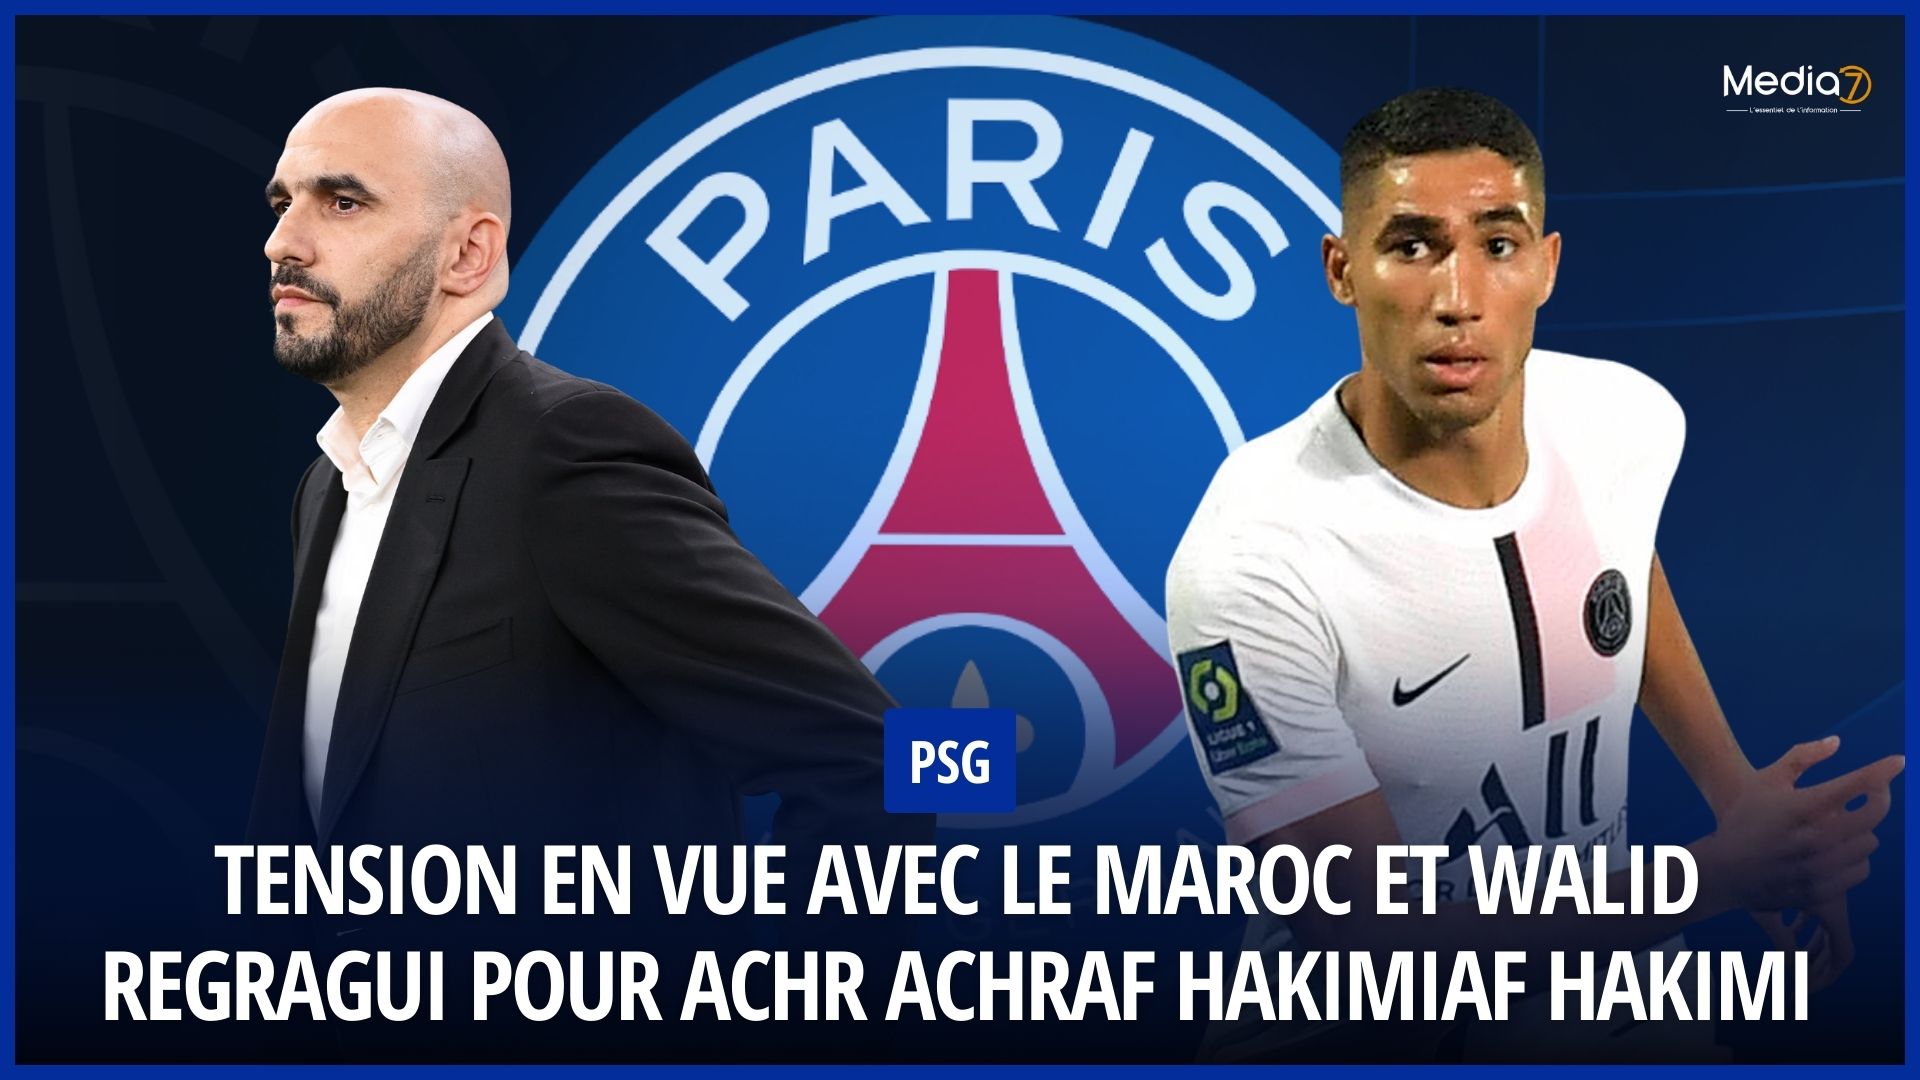 PSG: Tension in sight with Morocco and Walid Regragui Concerning Achraf Hakimi - Media7